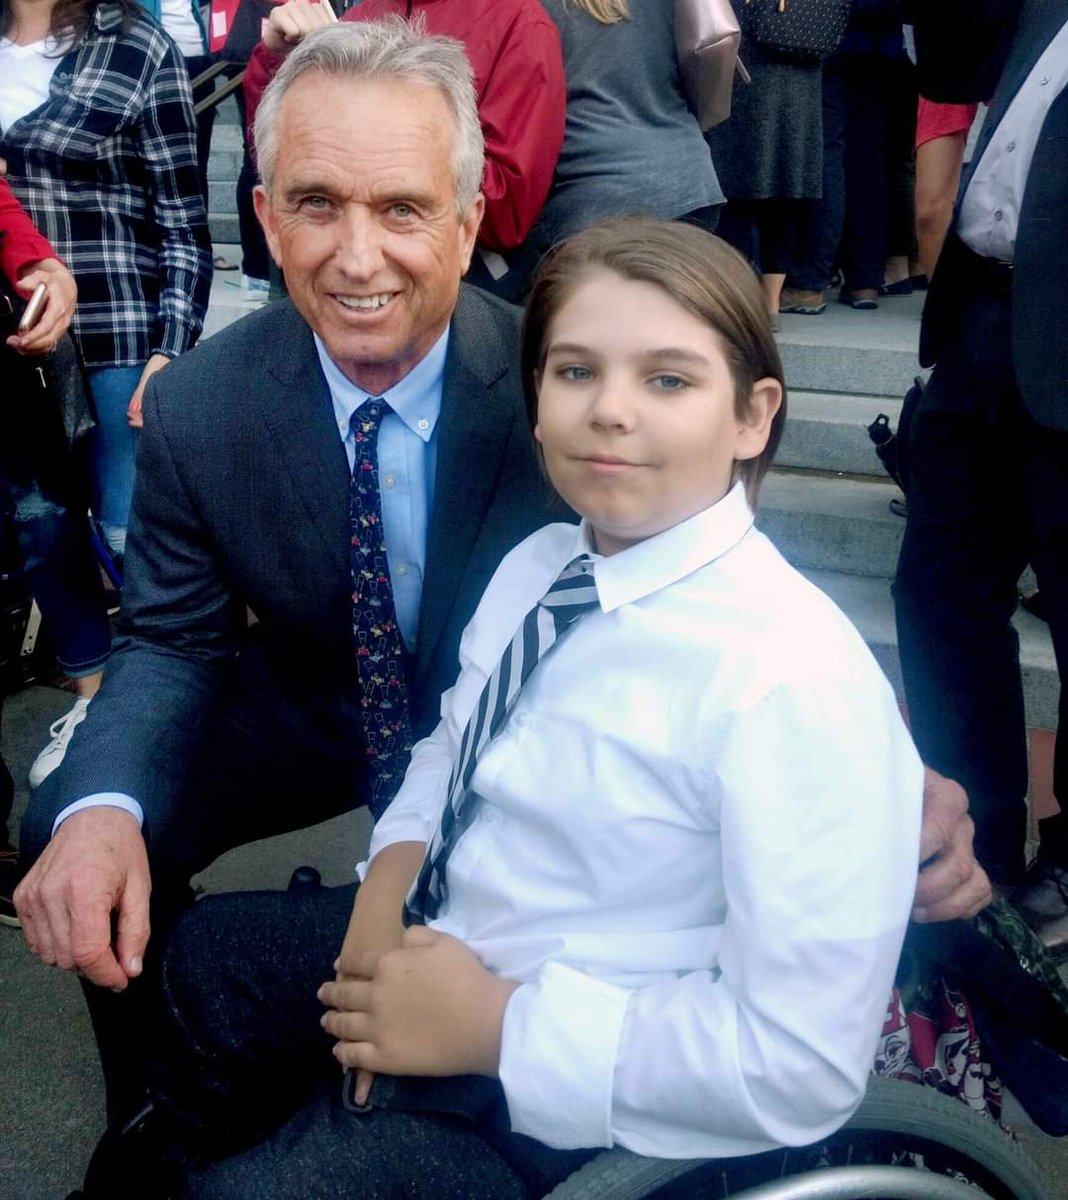 PARALYZED FOR LIFE BY DTAP.

'Meet Otto Coleman, a courageous and charismatic 10-year-old wheelchair bound by vaccine induced transverse myelitis. Neither he nor his 6-year-old brother, Fenton, will be eligible for medical exemptions under the narrow definitions in California